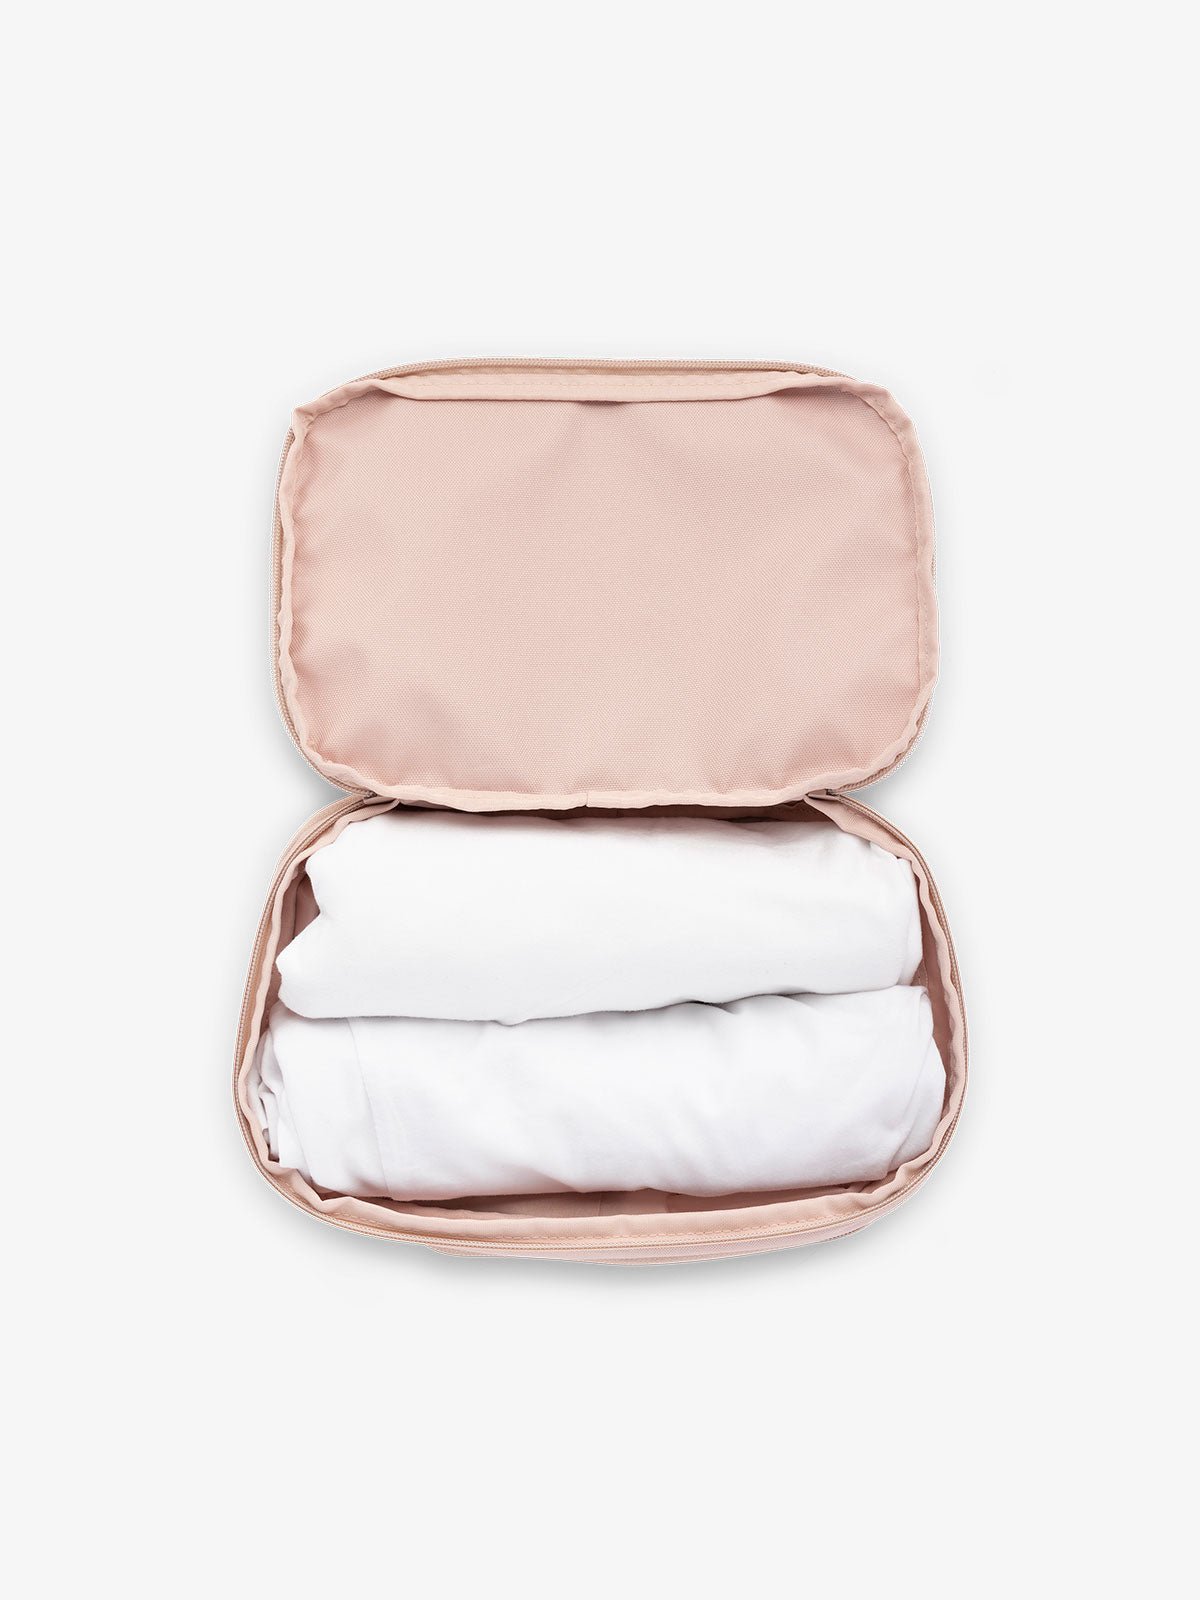 CALPAK small packing cubes for travel made with durable material in pink sand